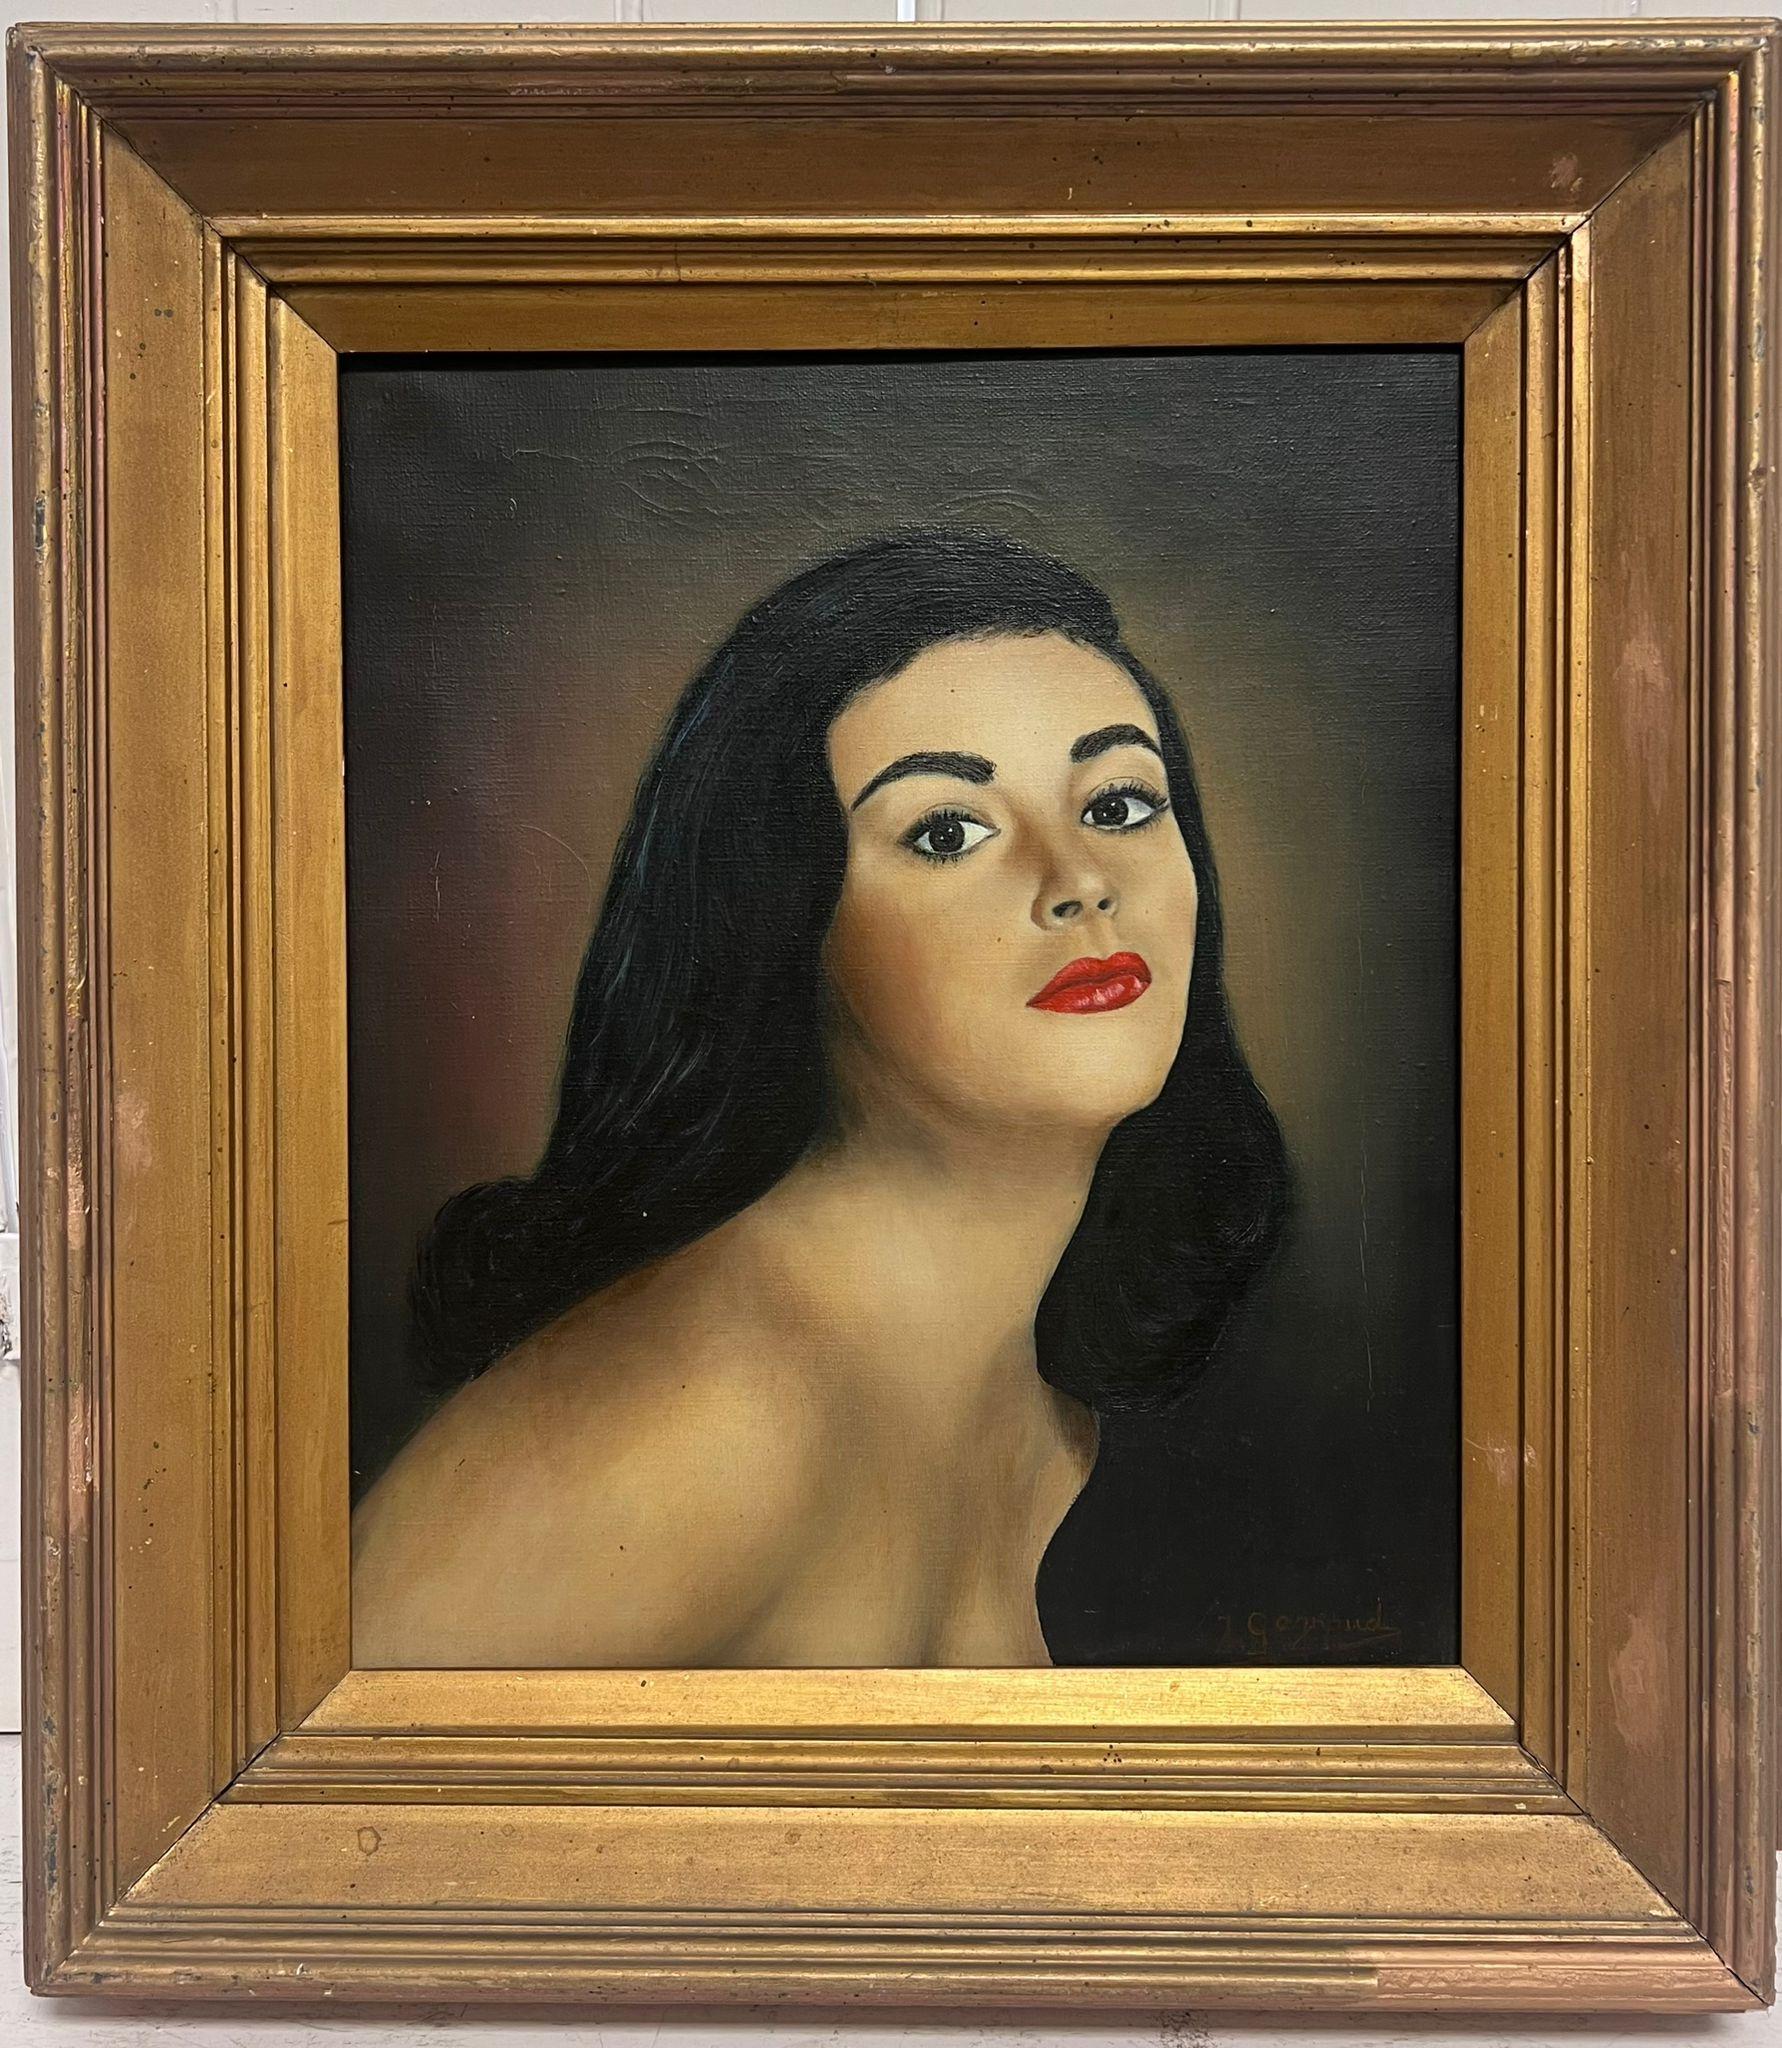 'La Napolitaine'
by Jean Gagnaud, French mid 20th century
signed oil on canvas, framed
framed: 20 x 18.5 inches
canvas: 15 x 13 inches
provenance: private collection, France
condition: very good and sound condition (old repairs to the frame). 